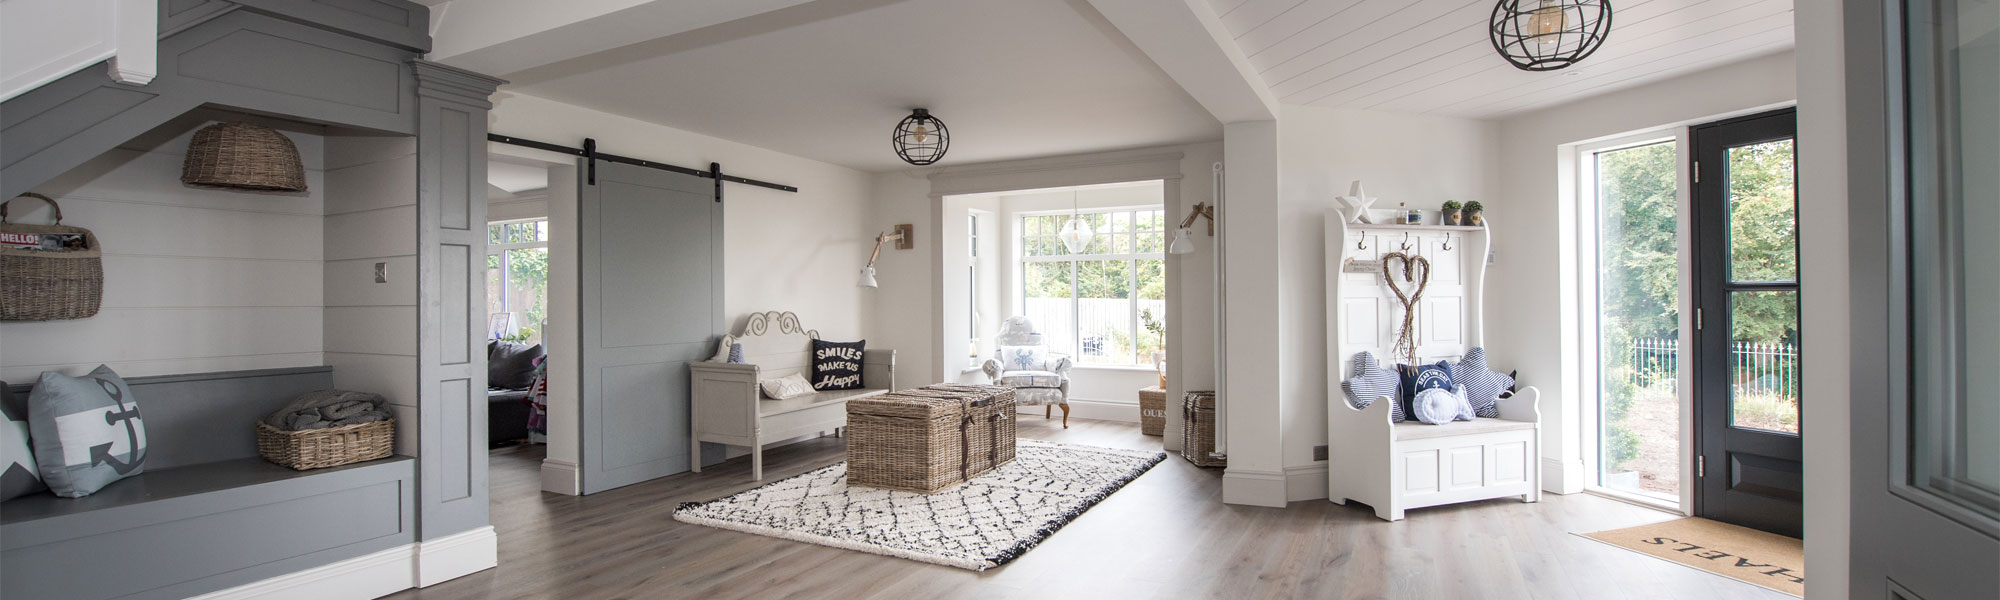 Home interiors in Conwy